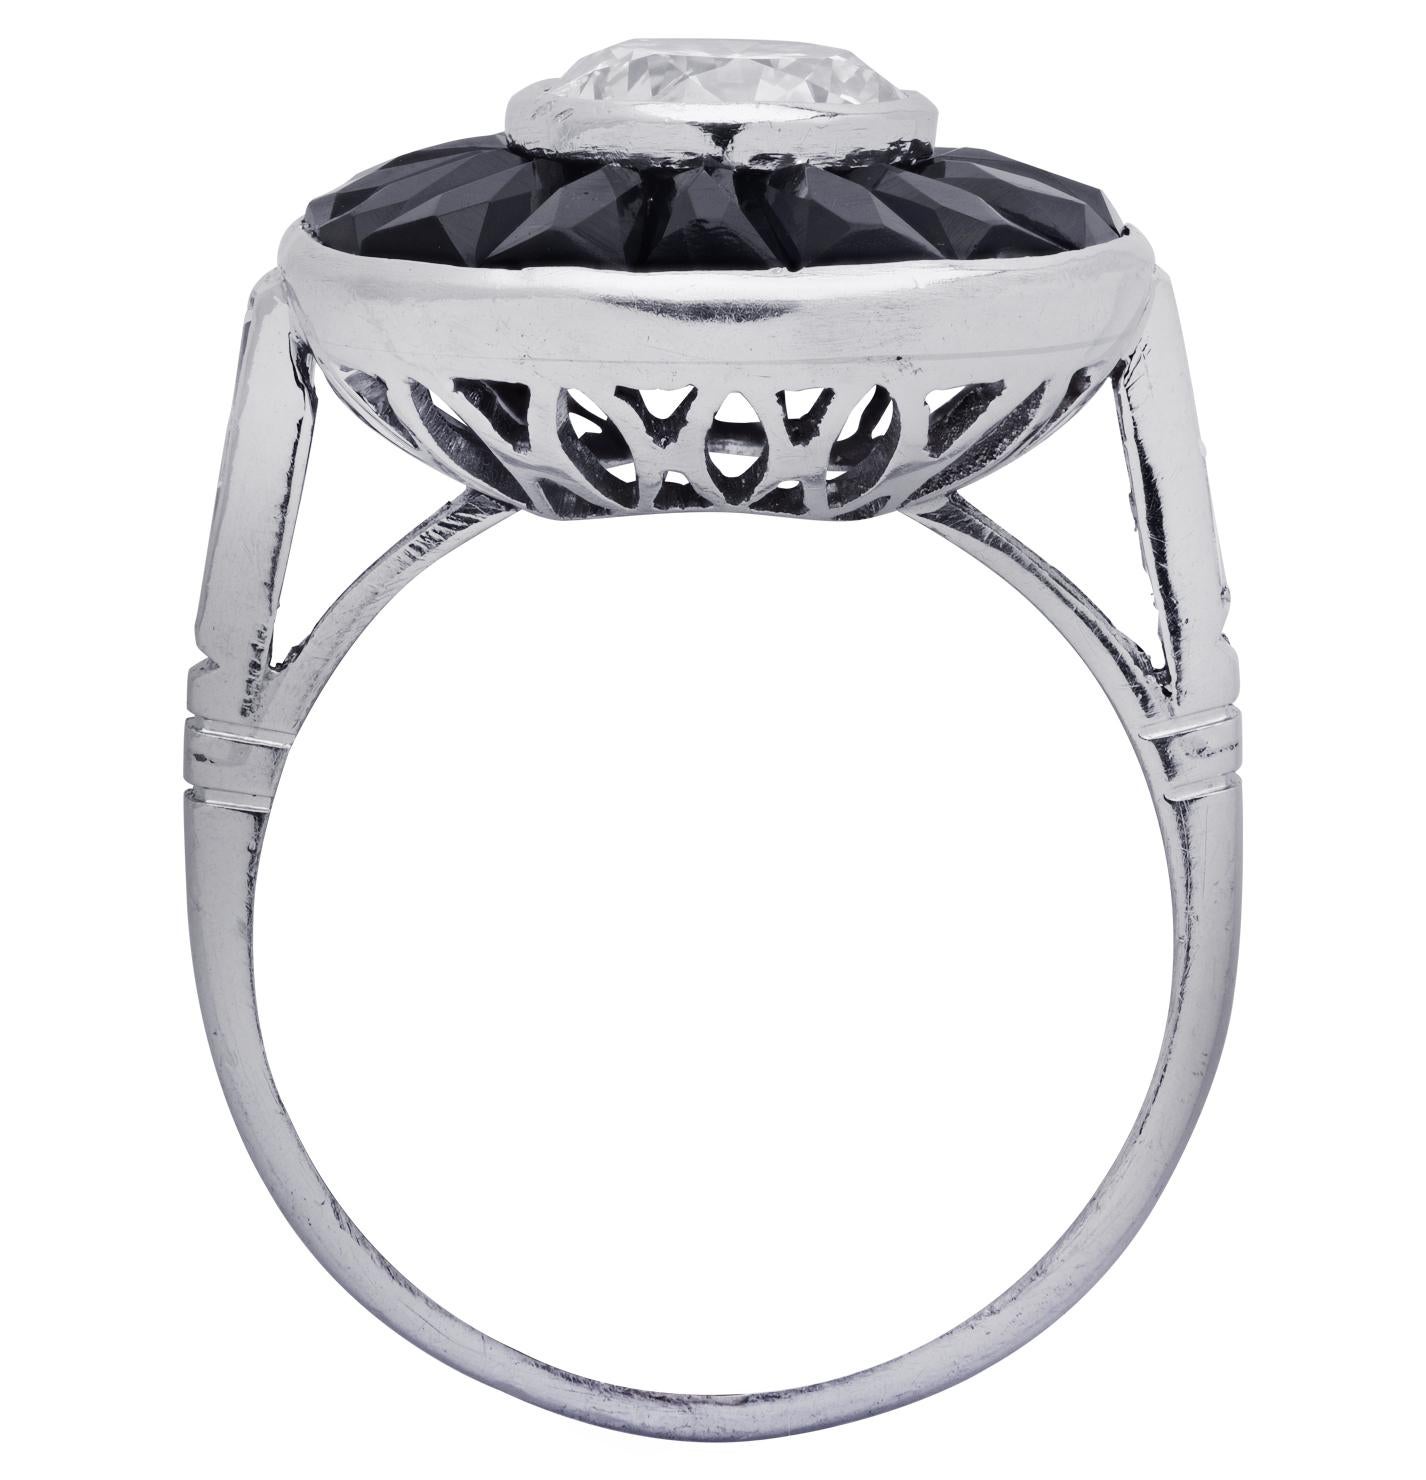 Stunning Art Deco style ring crafted in platinum showcasing a round brilliant cut diamond weighing approximately 1.1 carats G color, SI clarity and 4 baguette cut diamonds weighing approximately .25 carats total, G color, VS clarity. The diamond